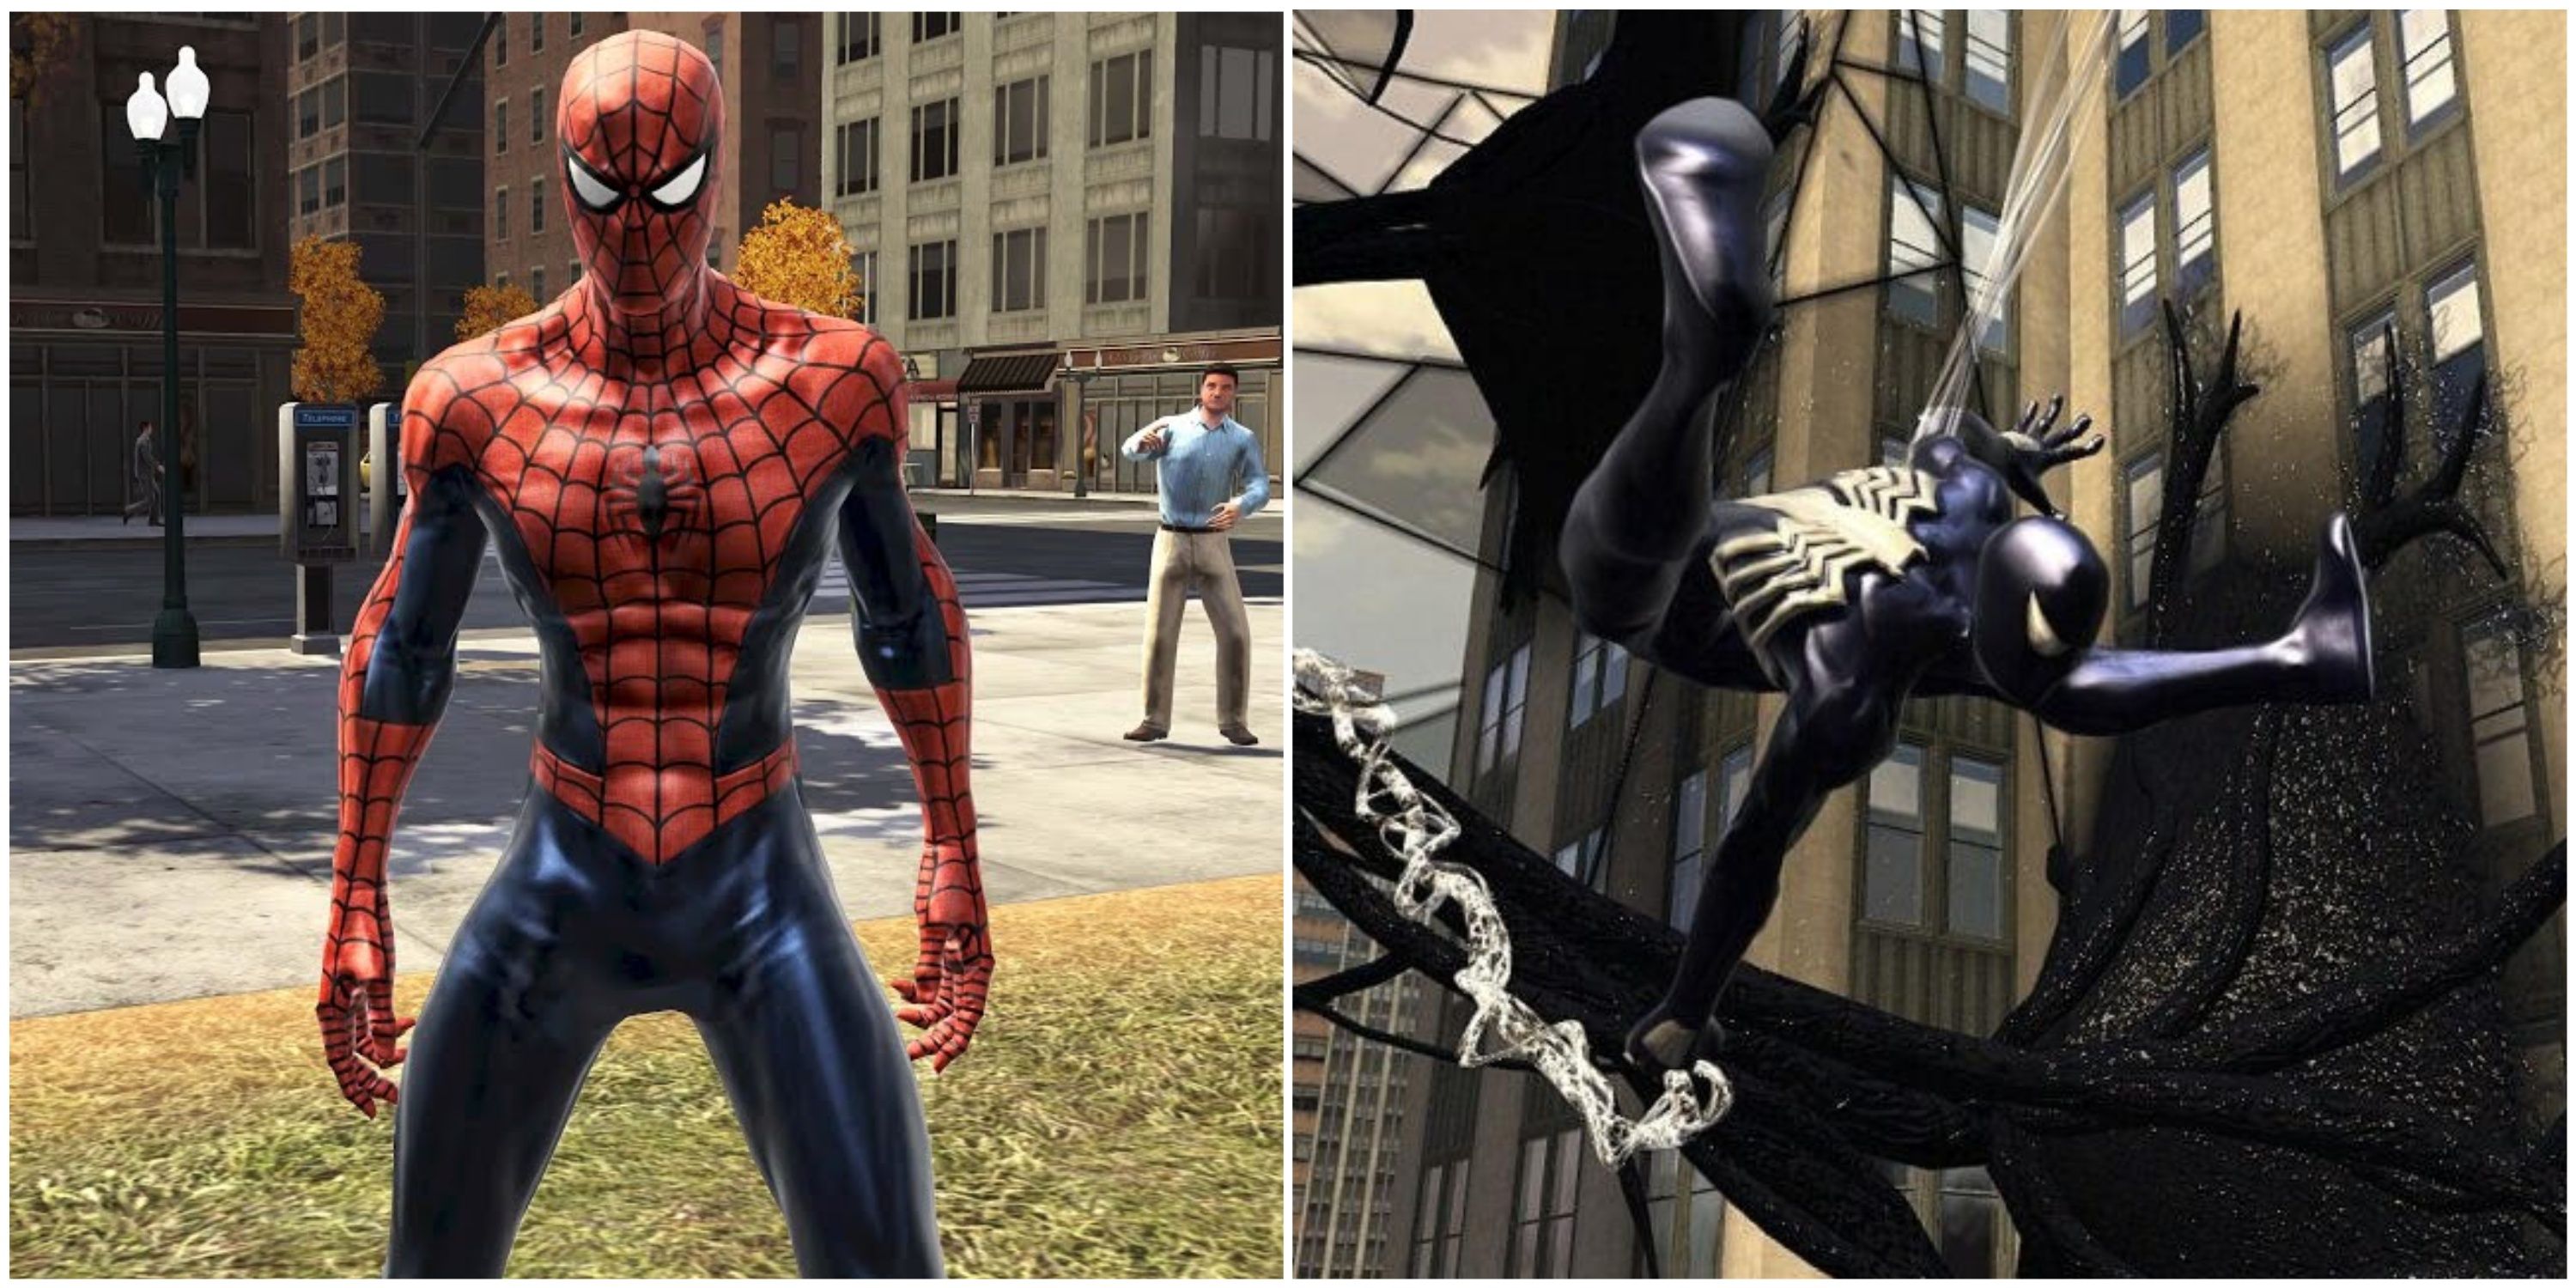 Spider-Man and the black suit in Spider-Man: Web of Shadows